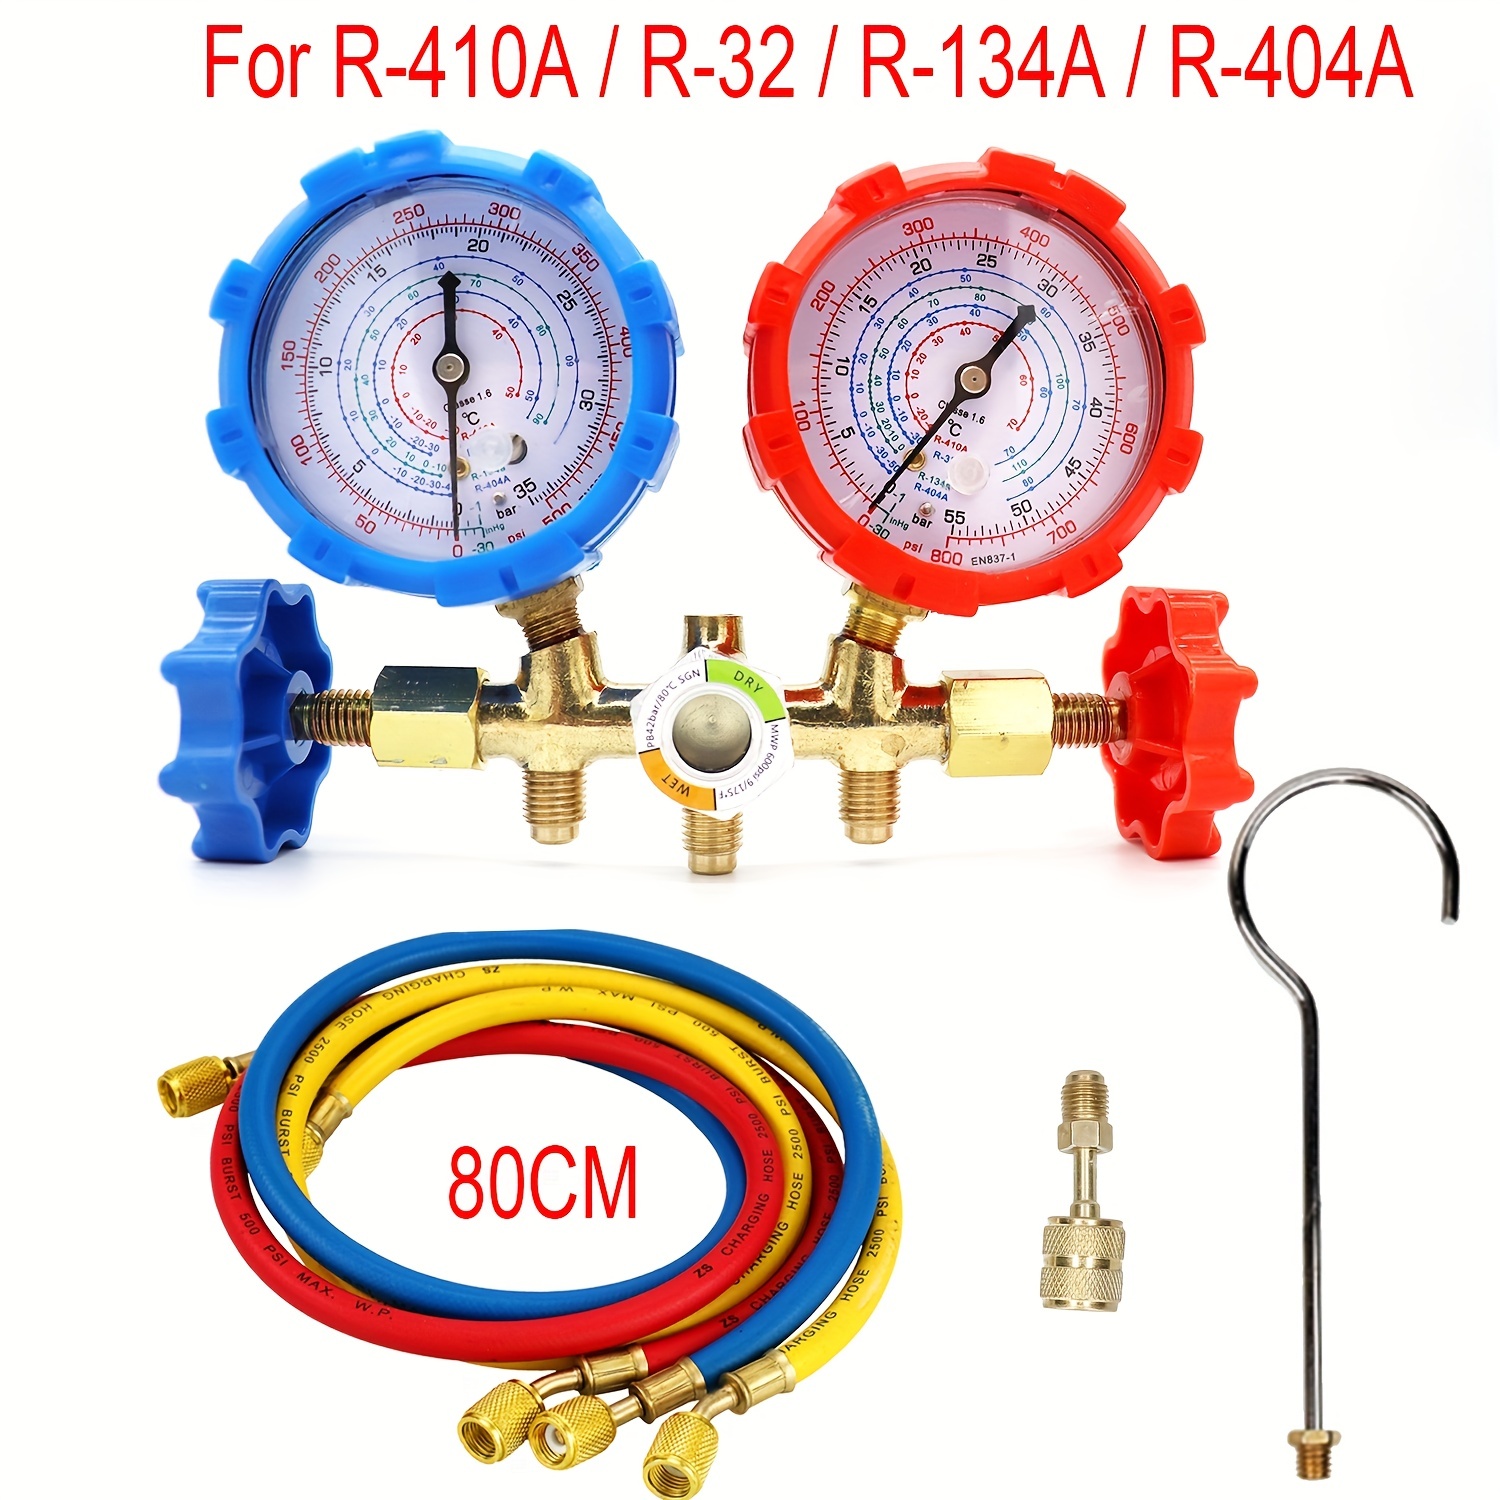 Refrigerant 410a, R410a, Recharge Kit, Check & Charge-It Gauge, Hose, Valve  Tool